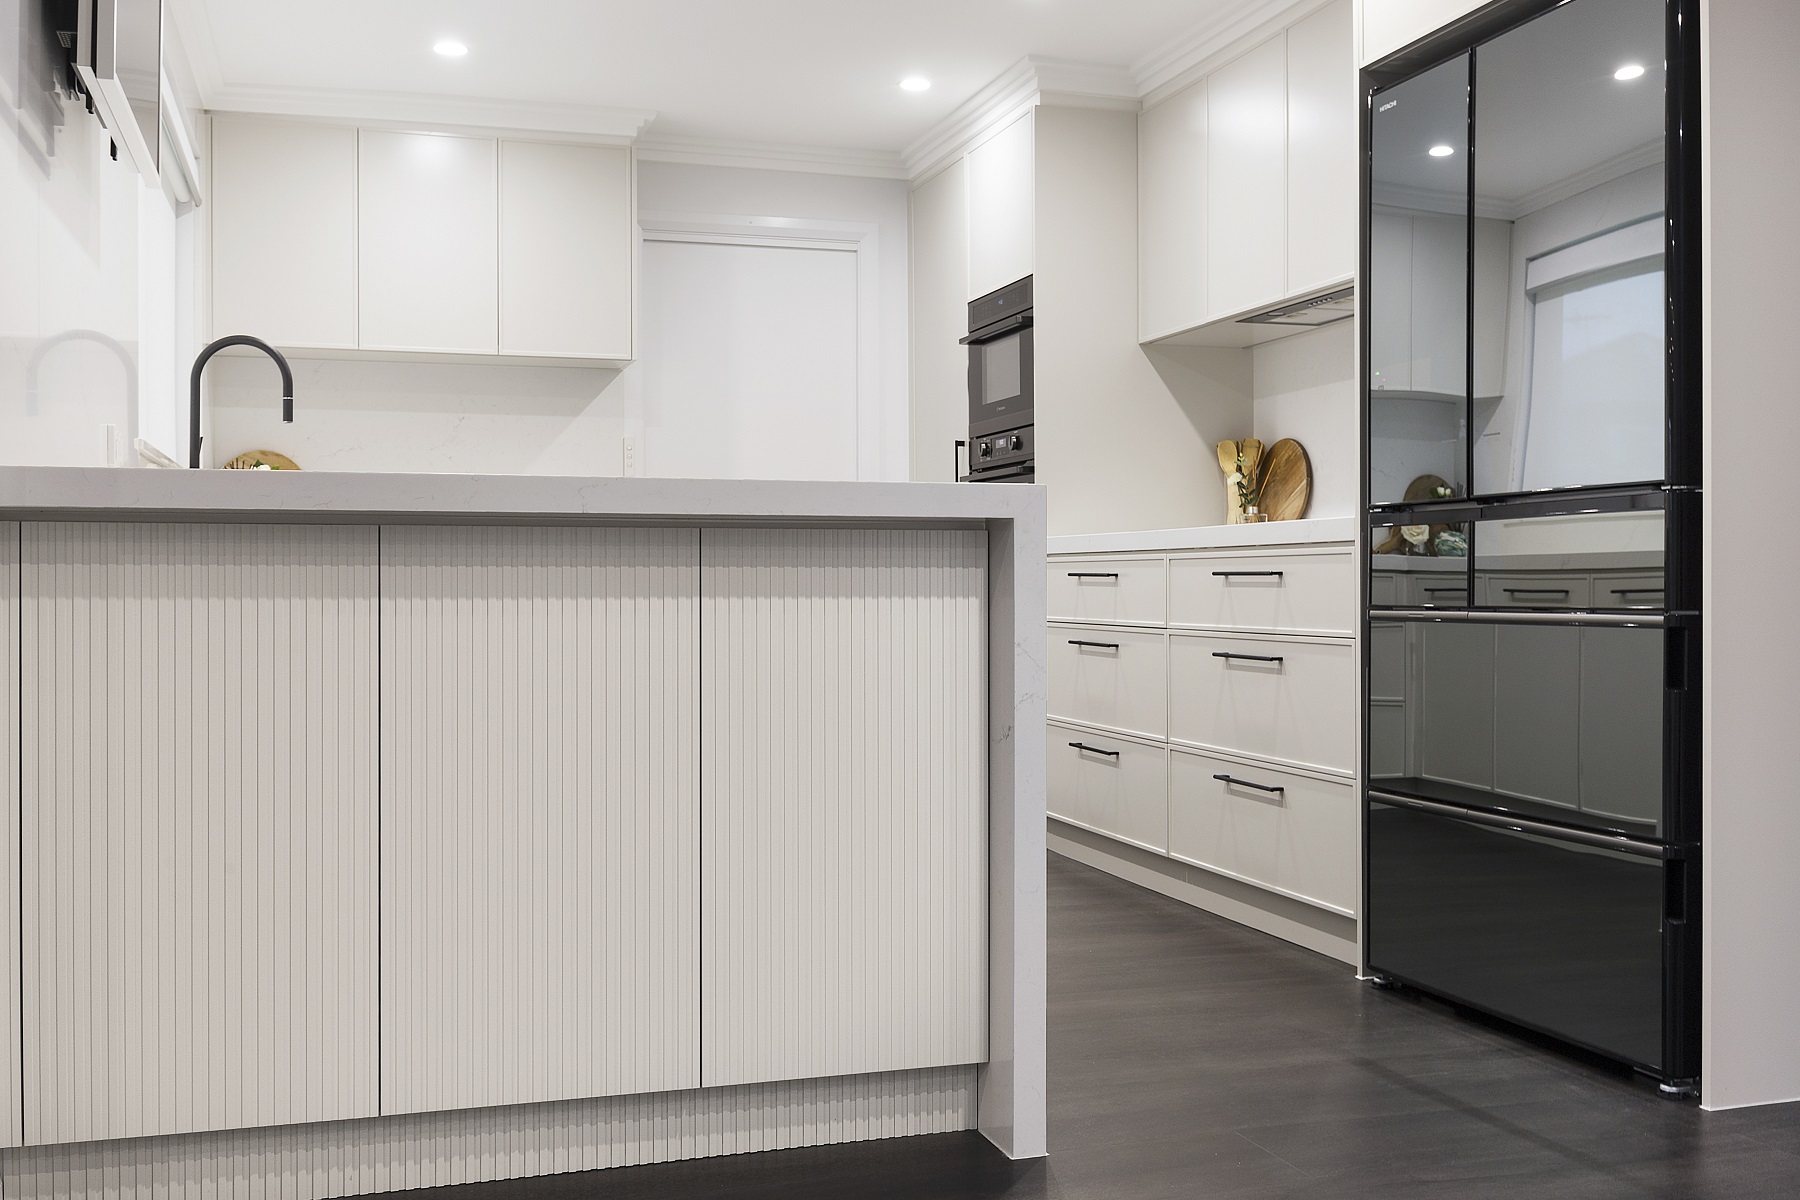 Moorebank, Polyurethane Thin Shaker kitchen with a Quantum Quartz stone benchtop and splashback in Michelangelo and featuring a fluted paneled breakfast bar